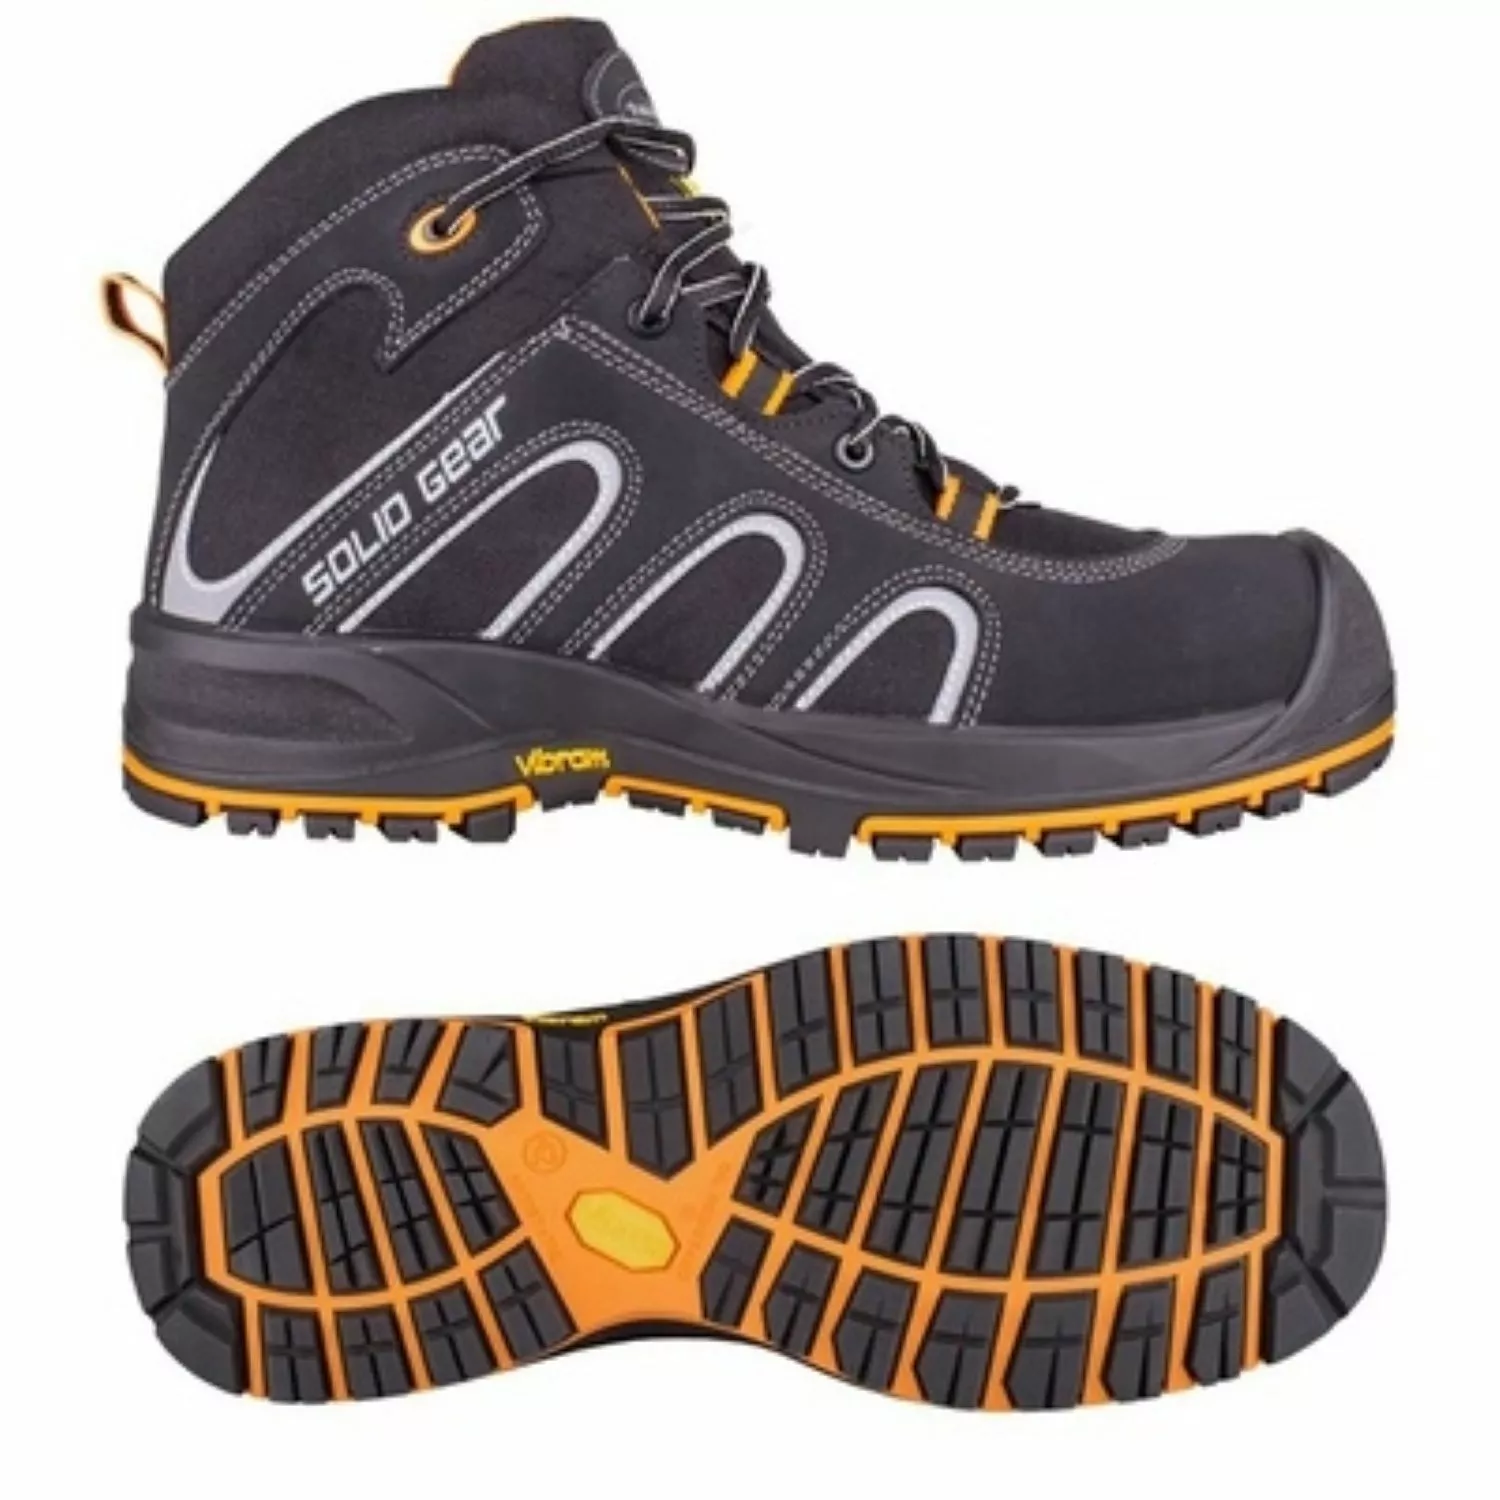 Solid Gear 73002 Falcon chaussure de travail - taille 46